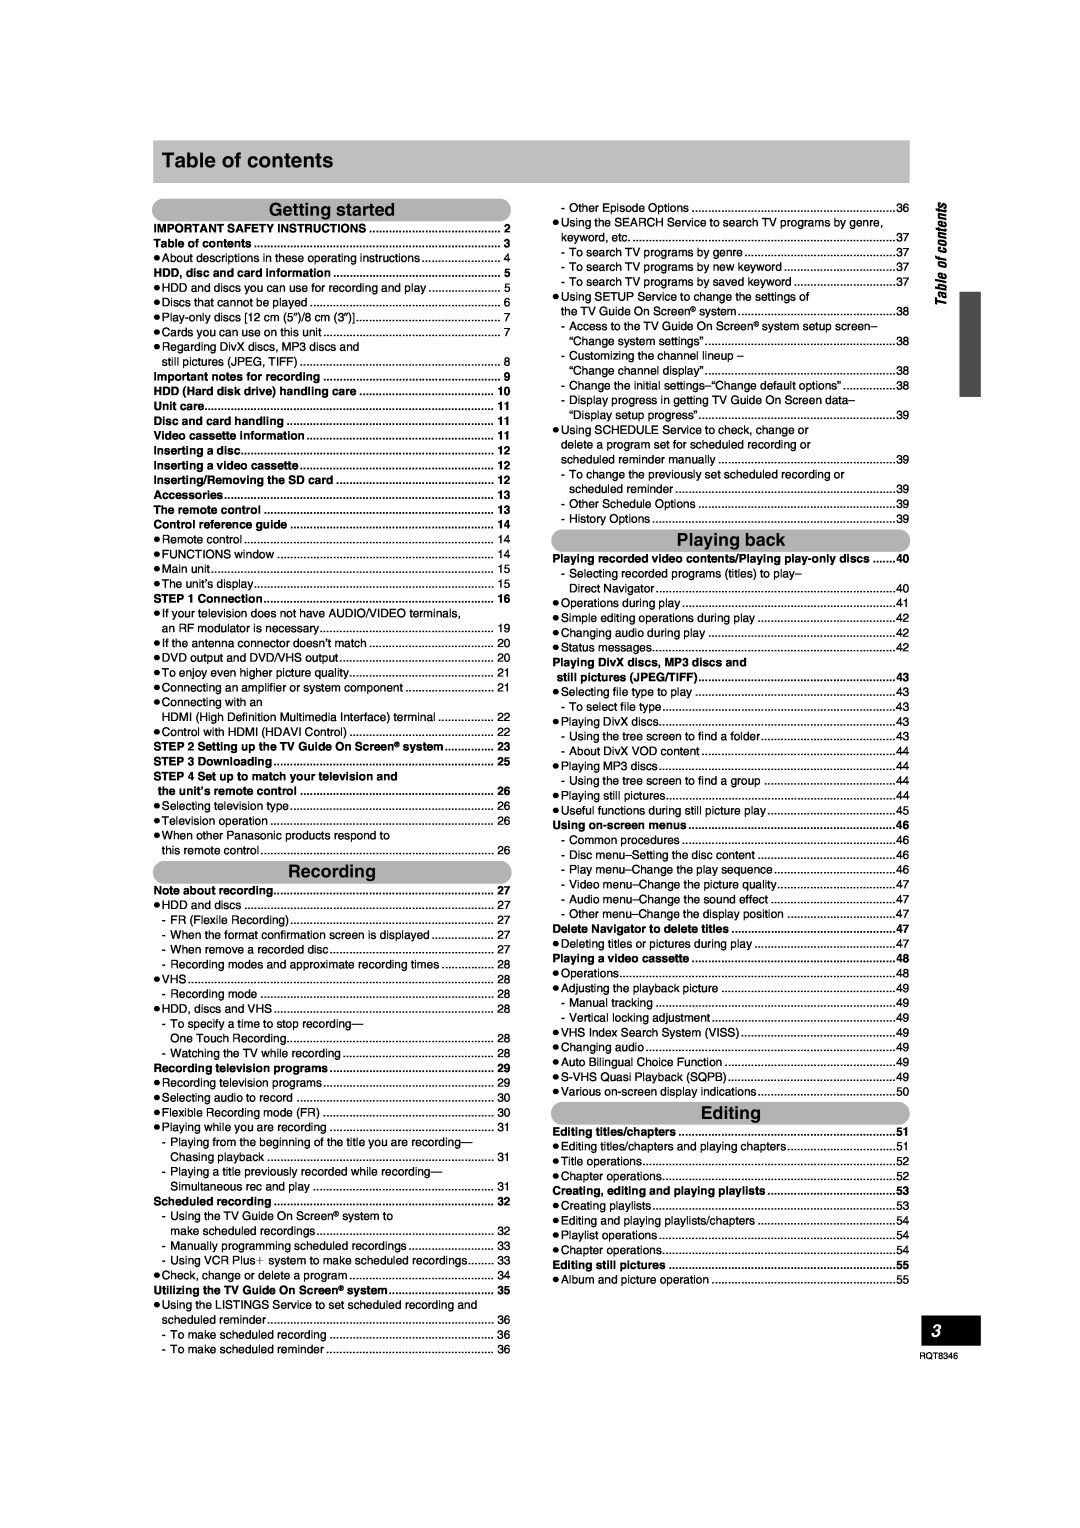 Panasonic DMR-EH75V warranty Table of contents, Getting started, Recording, Playing back, Editing 